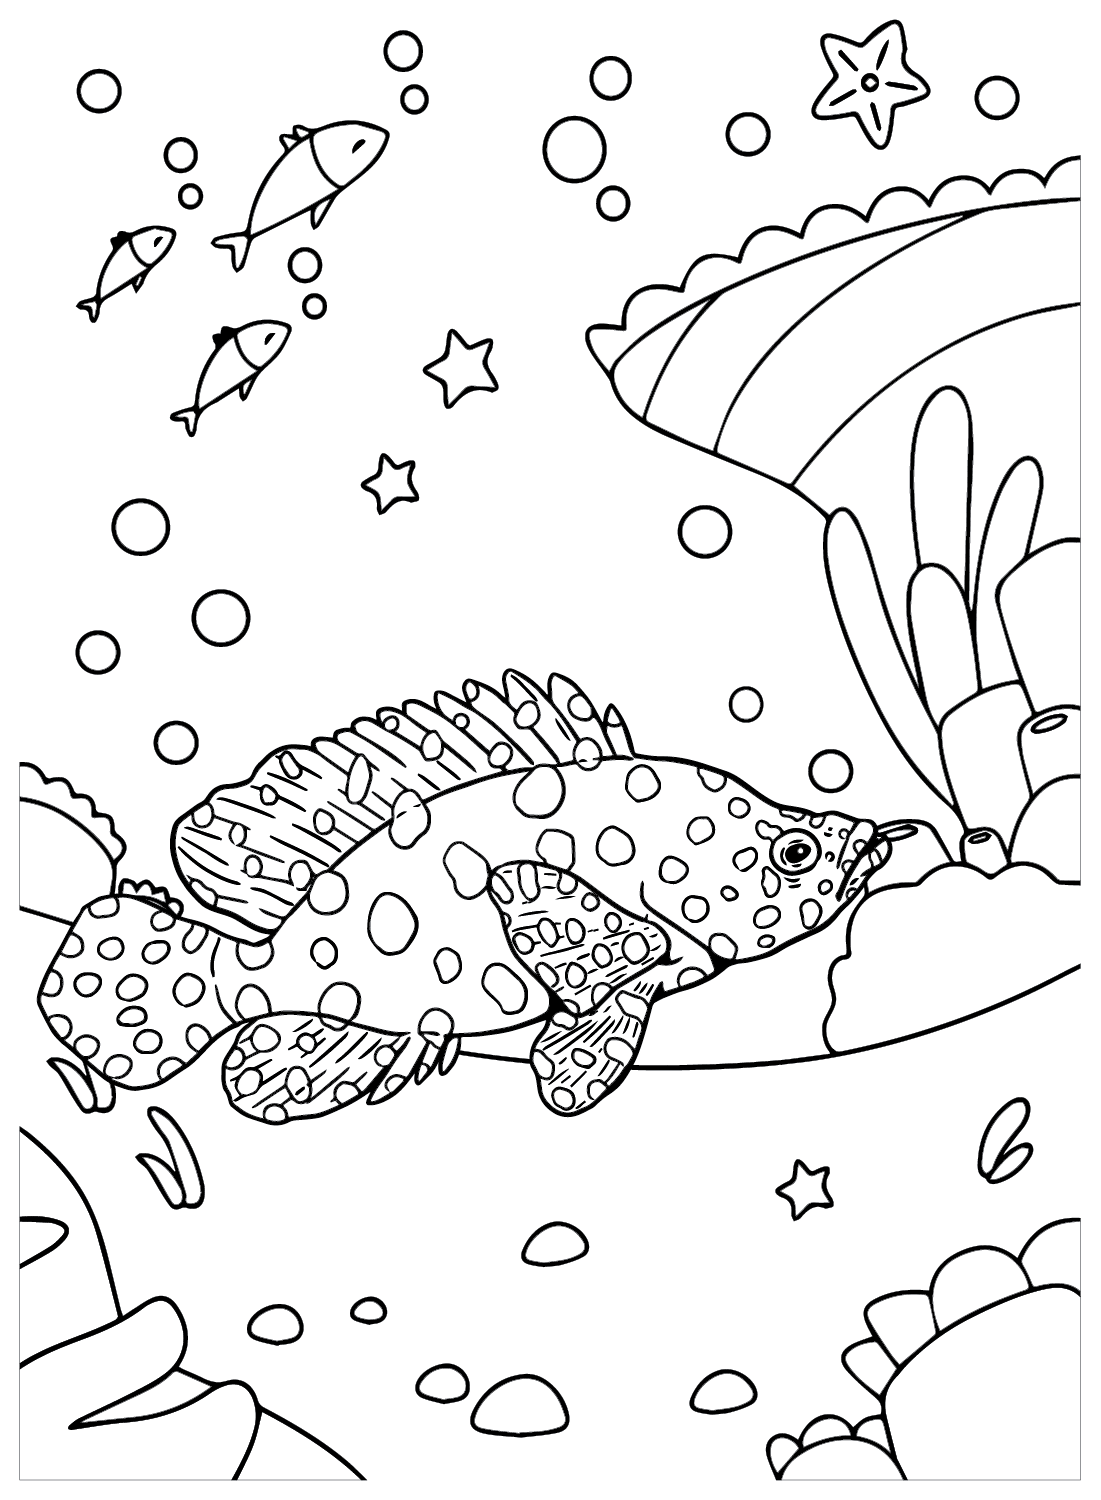 Grouper Printable from Grouper